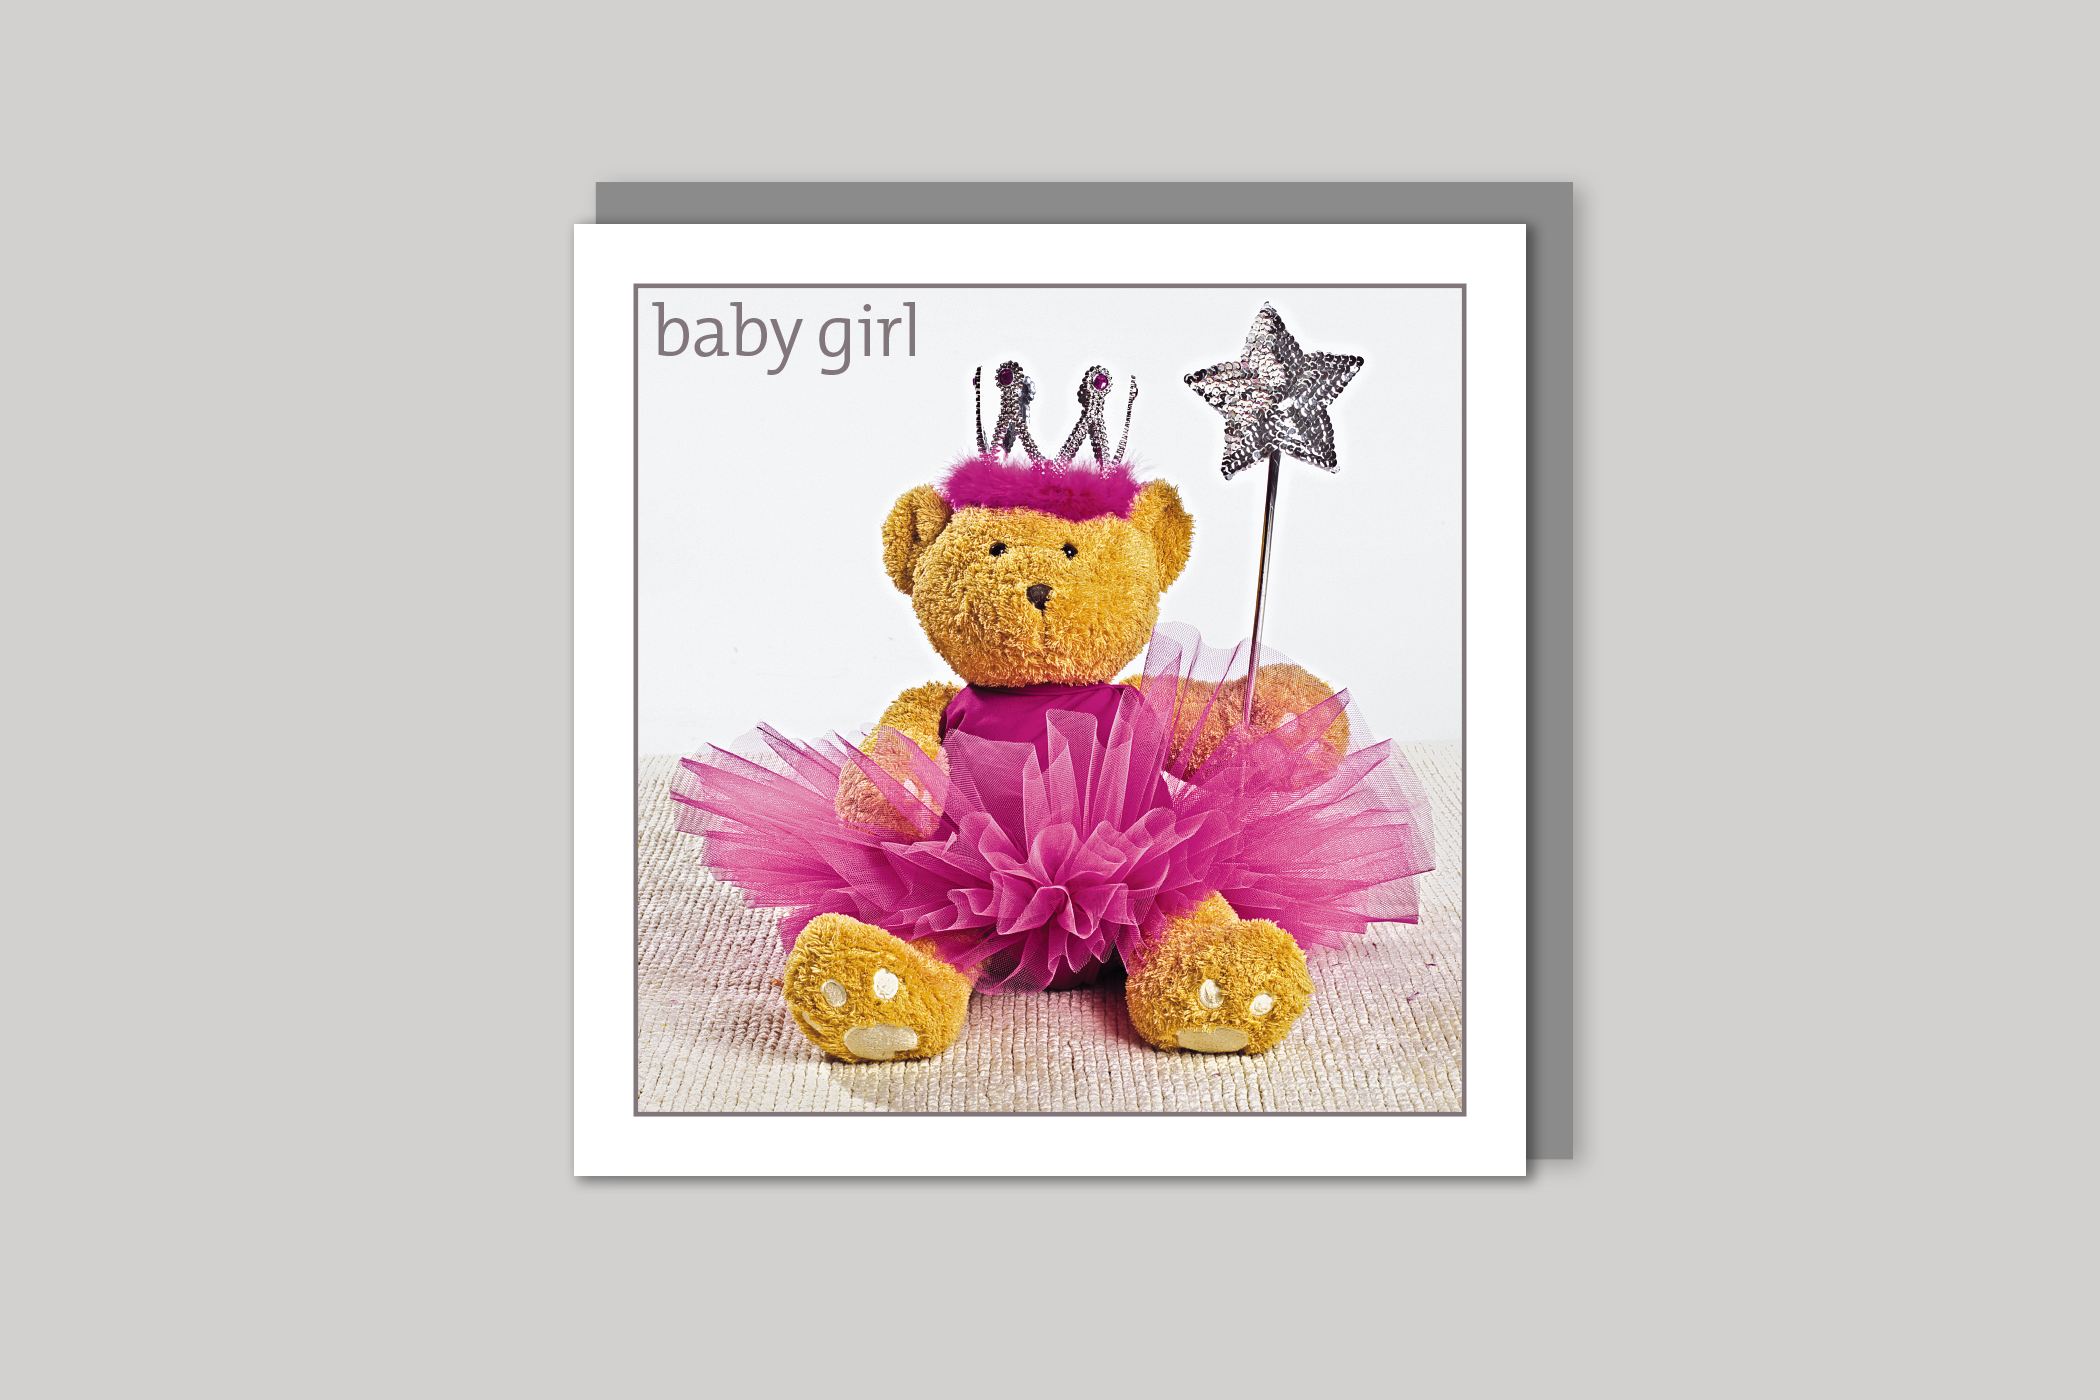 Teddy Tutu new baby girl card from Exposure Silver Edition range of greeting cards by Icon, back page.